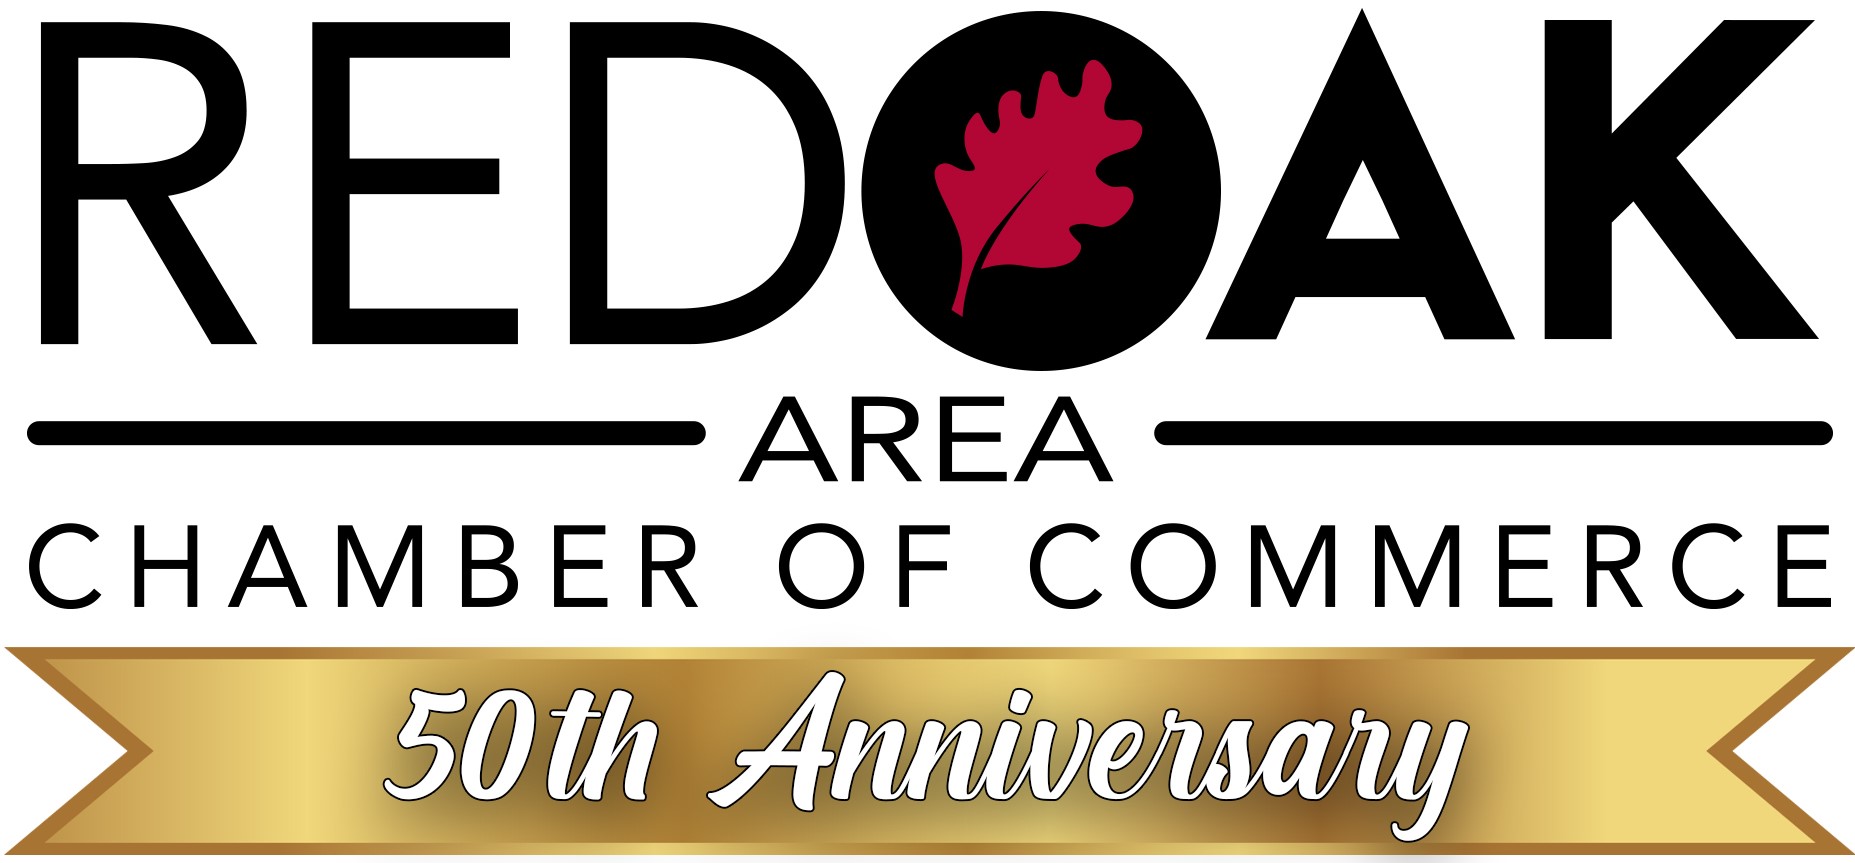 Red Oak Area Chamber of Commerce